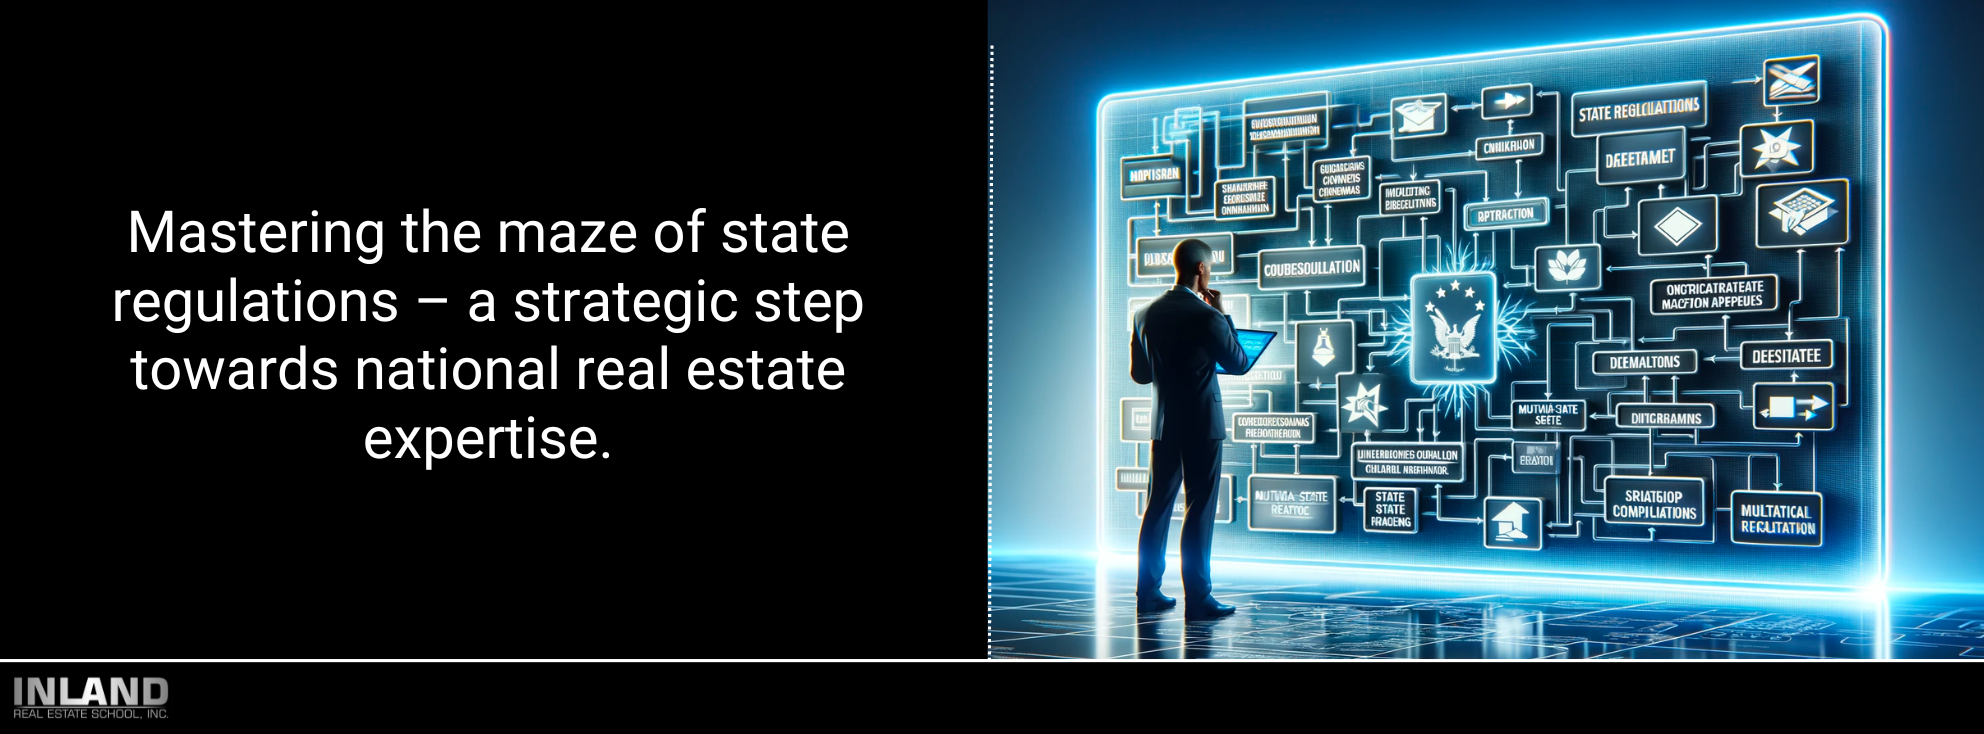 Agent evaluating complex flowchart of state real estate regulations for cross-state practice.